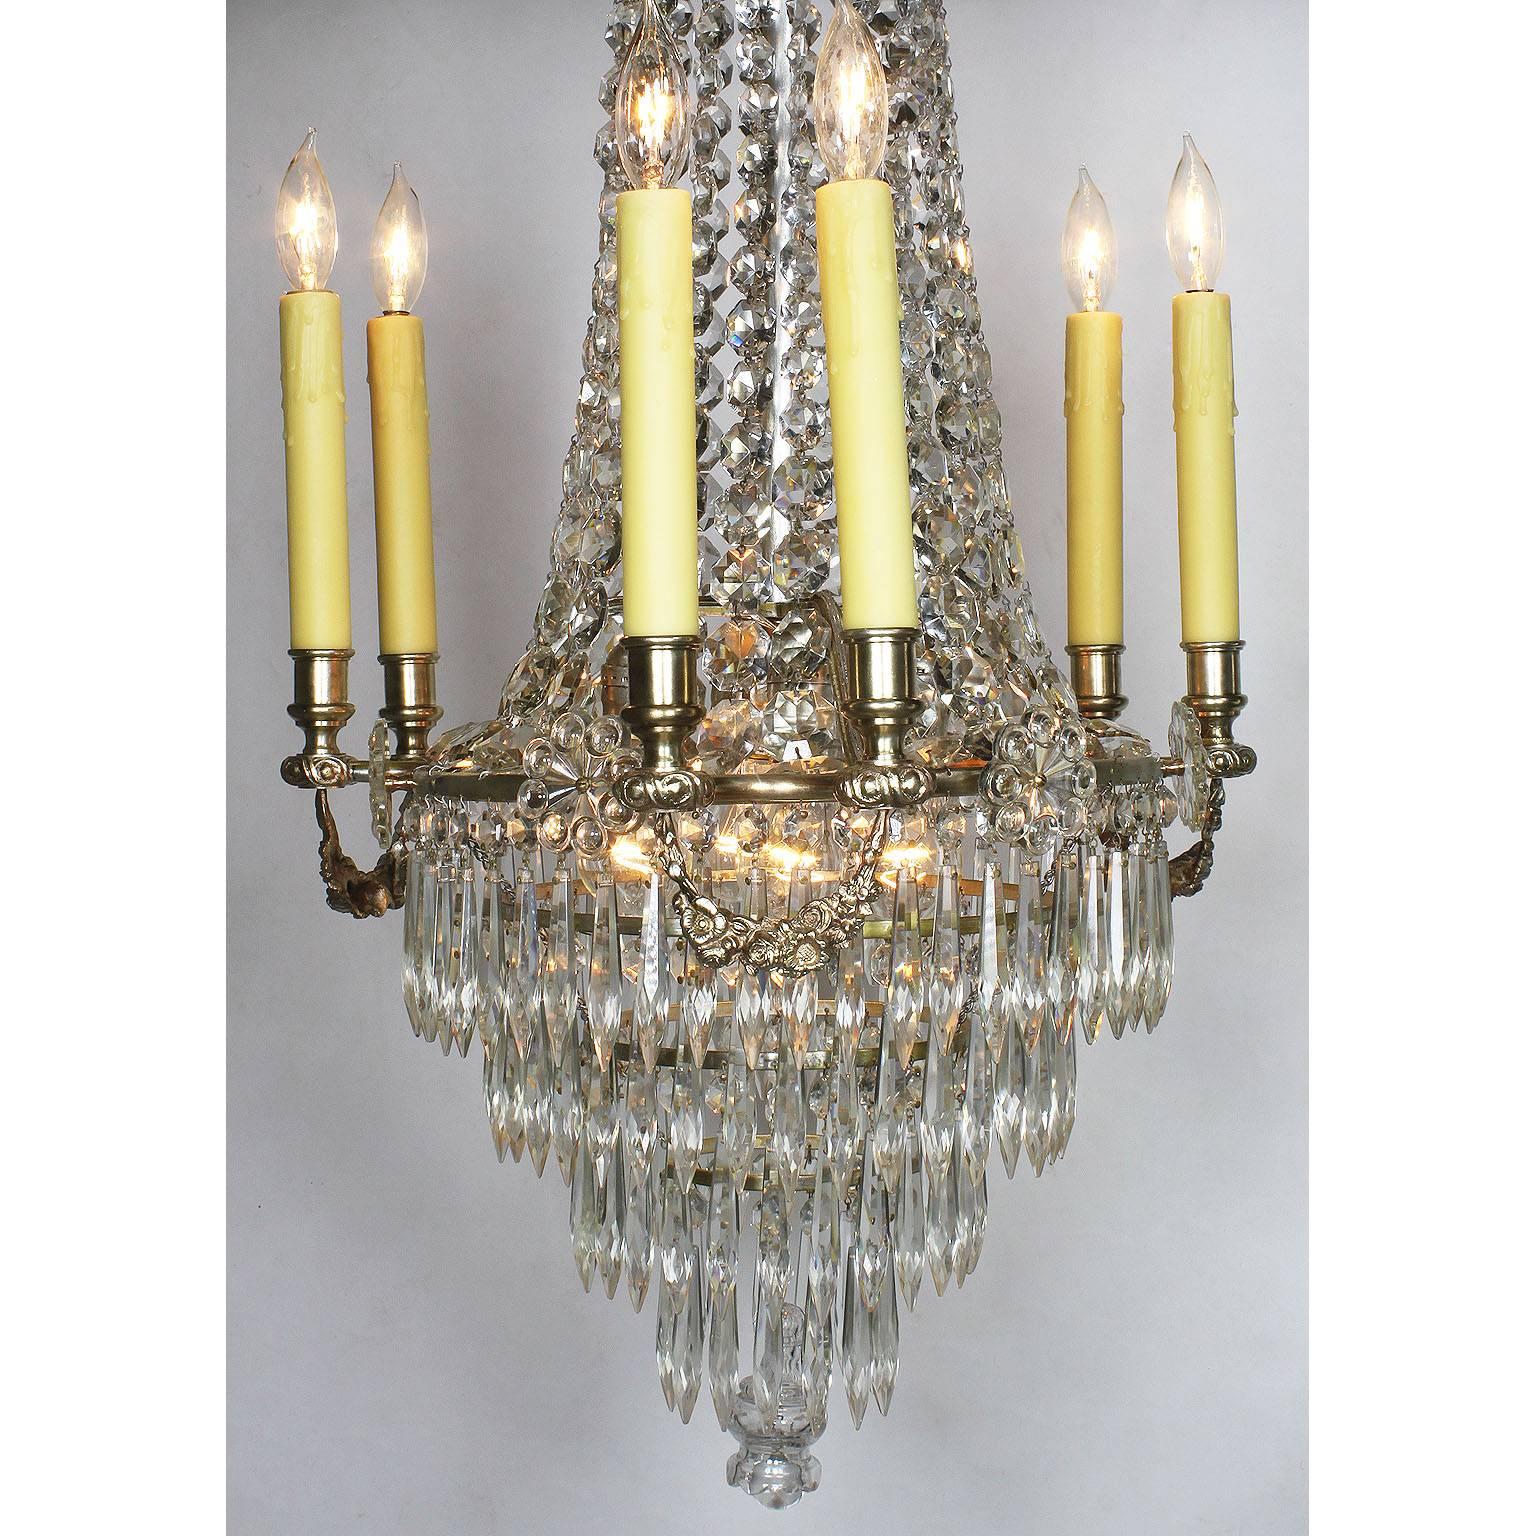 Cut Glass French 19th-20th Century Louis XVI Style Silvered Bronze & Cut-Glass Chandelier For Sale